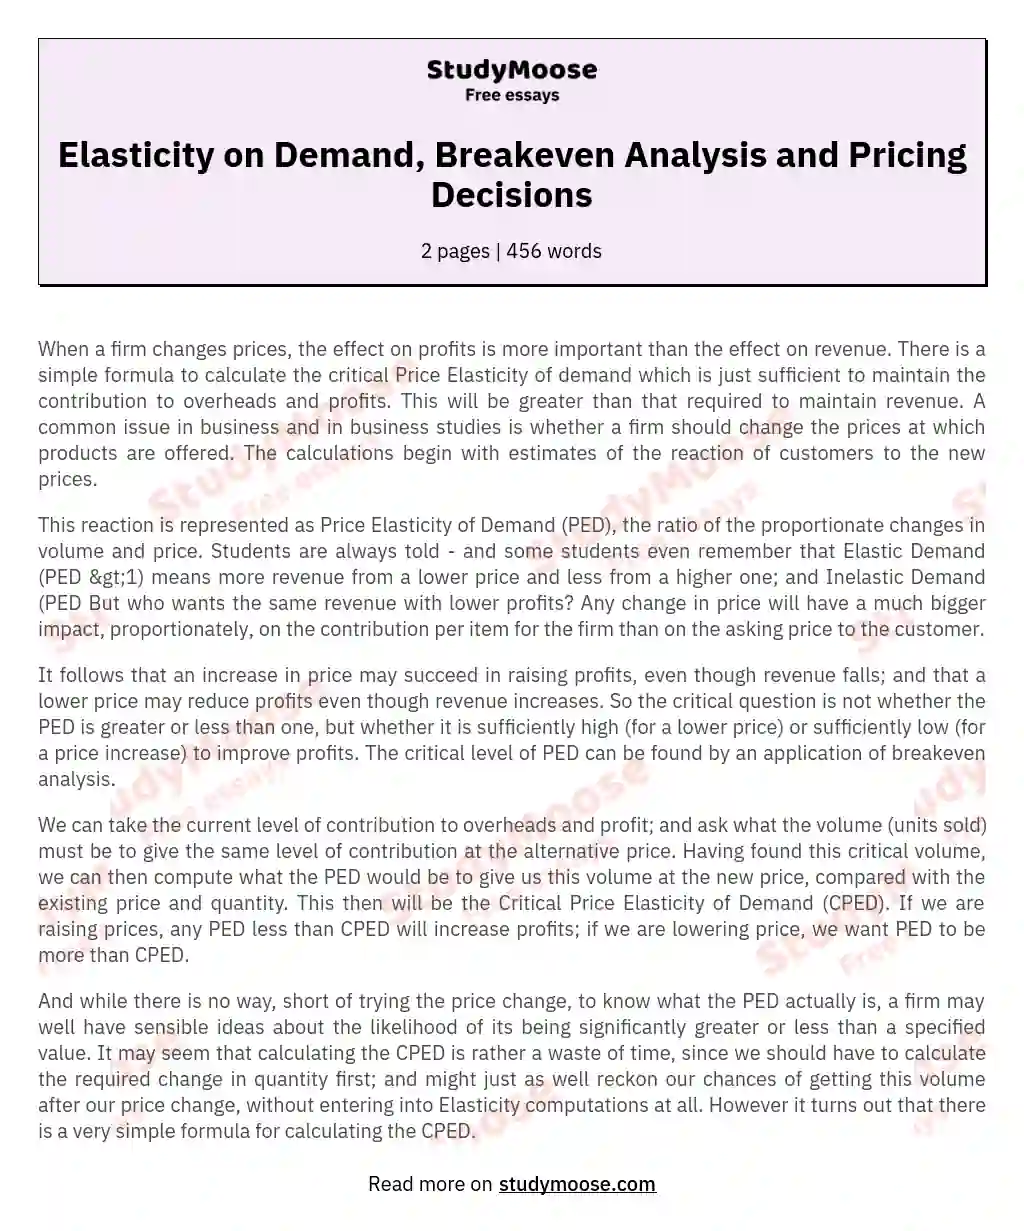 Elasticity on Demand, Breakeven Analysis and Pricing Decisions essay